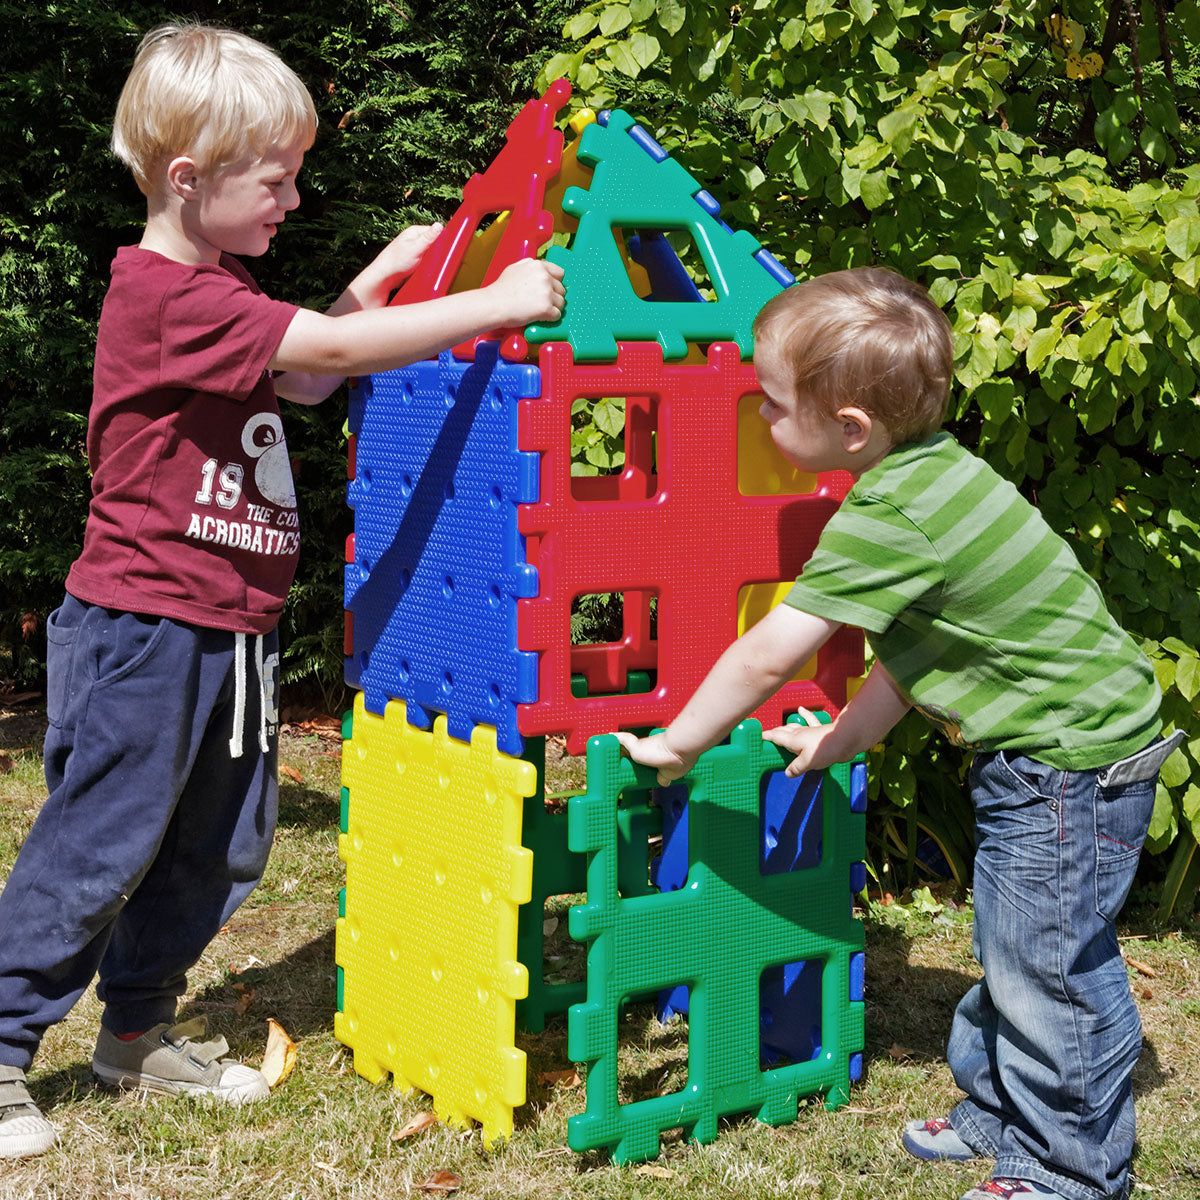 Giant Polydron XL Set 1, The Giant Polydron XL Set 1 is the ultimate building toy for children. With its 12 large, durable pieces, children can let their imaginations run wild as they create castles, princess towers, cars, boats, houses, and even tunnels to crawl through. This set is not only fun but also educational. Children will learn about different shapes, both 2-dimensional and 3-dimensional objects. They will also develop an understanding of texture, teamwork, and role play as they work together to b